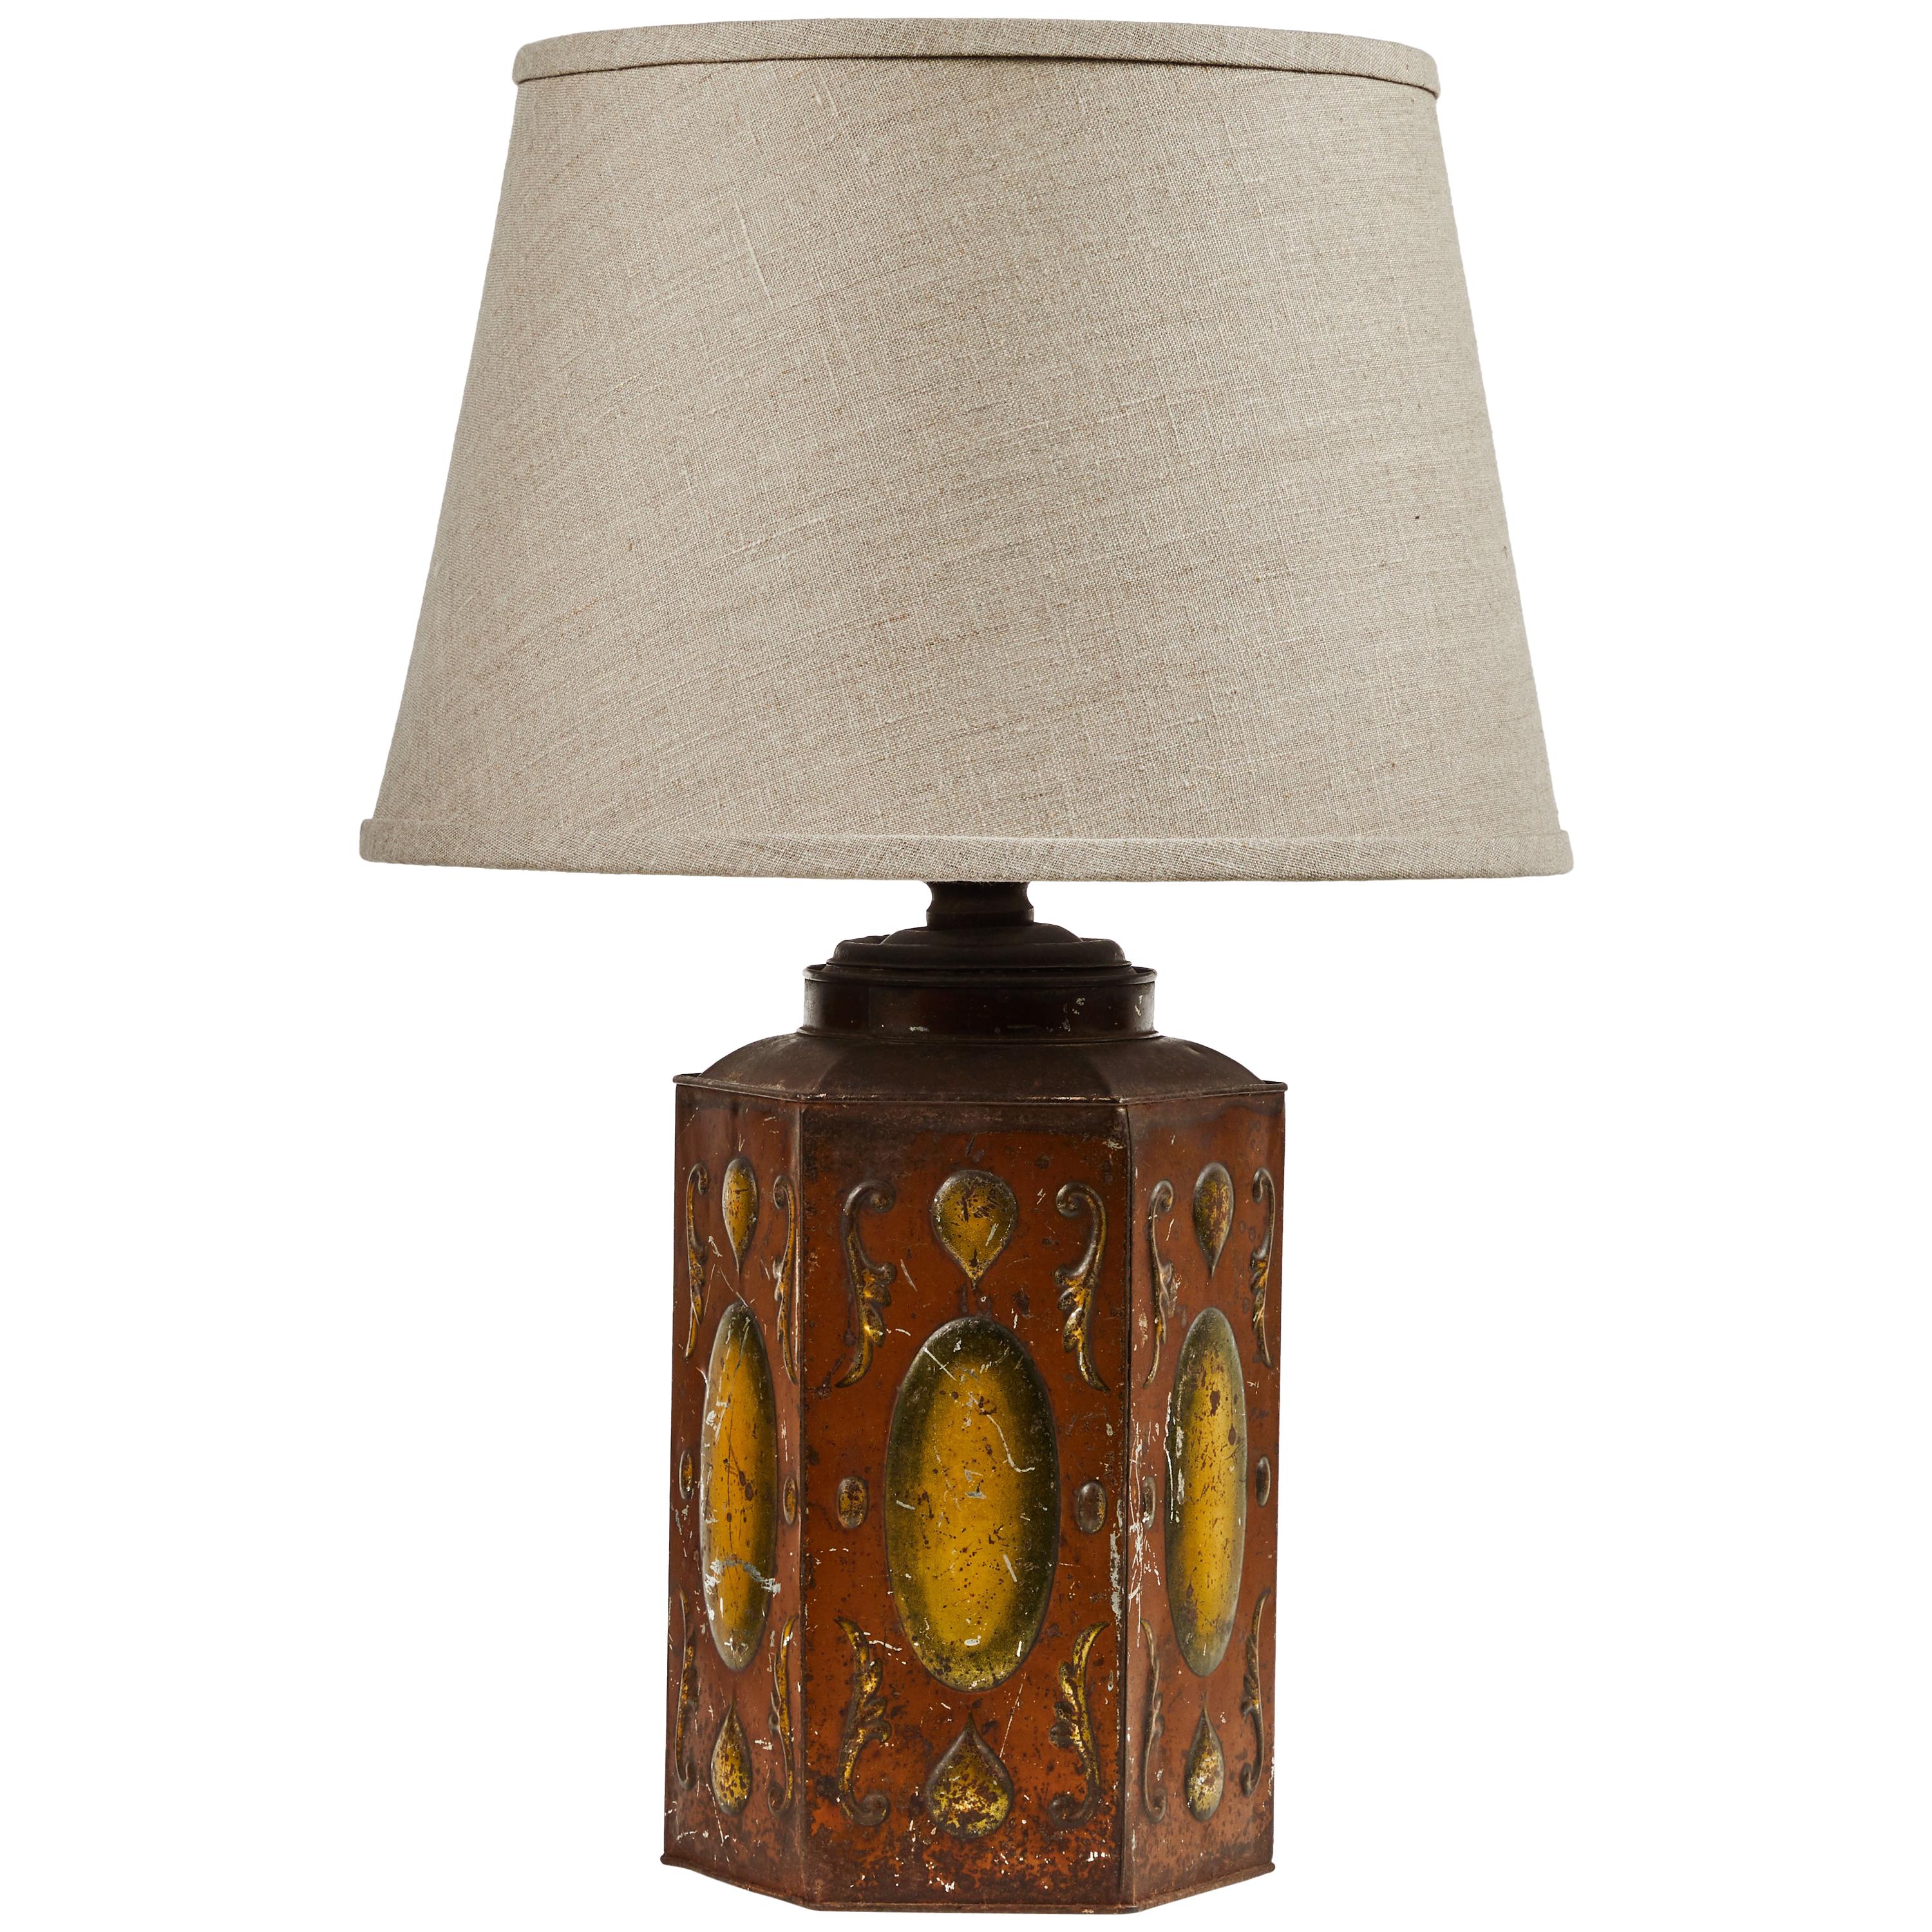 Late 19th Century Tole Decorated Tin Lamp with Custom Shade 